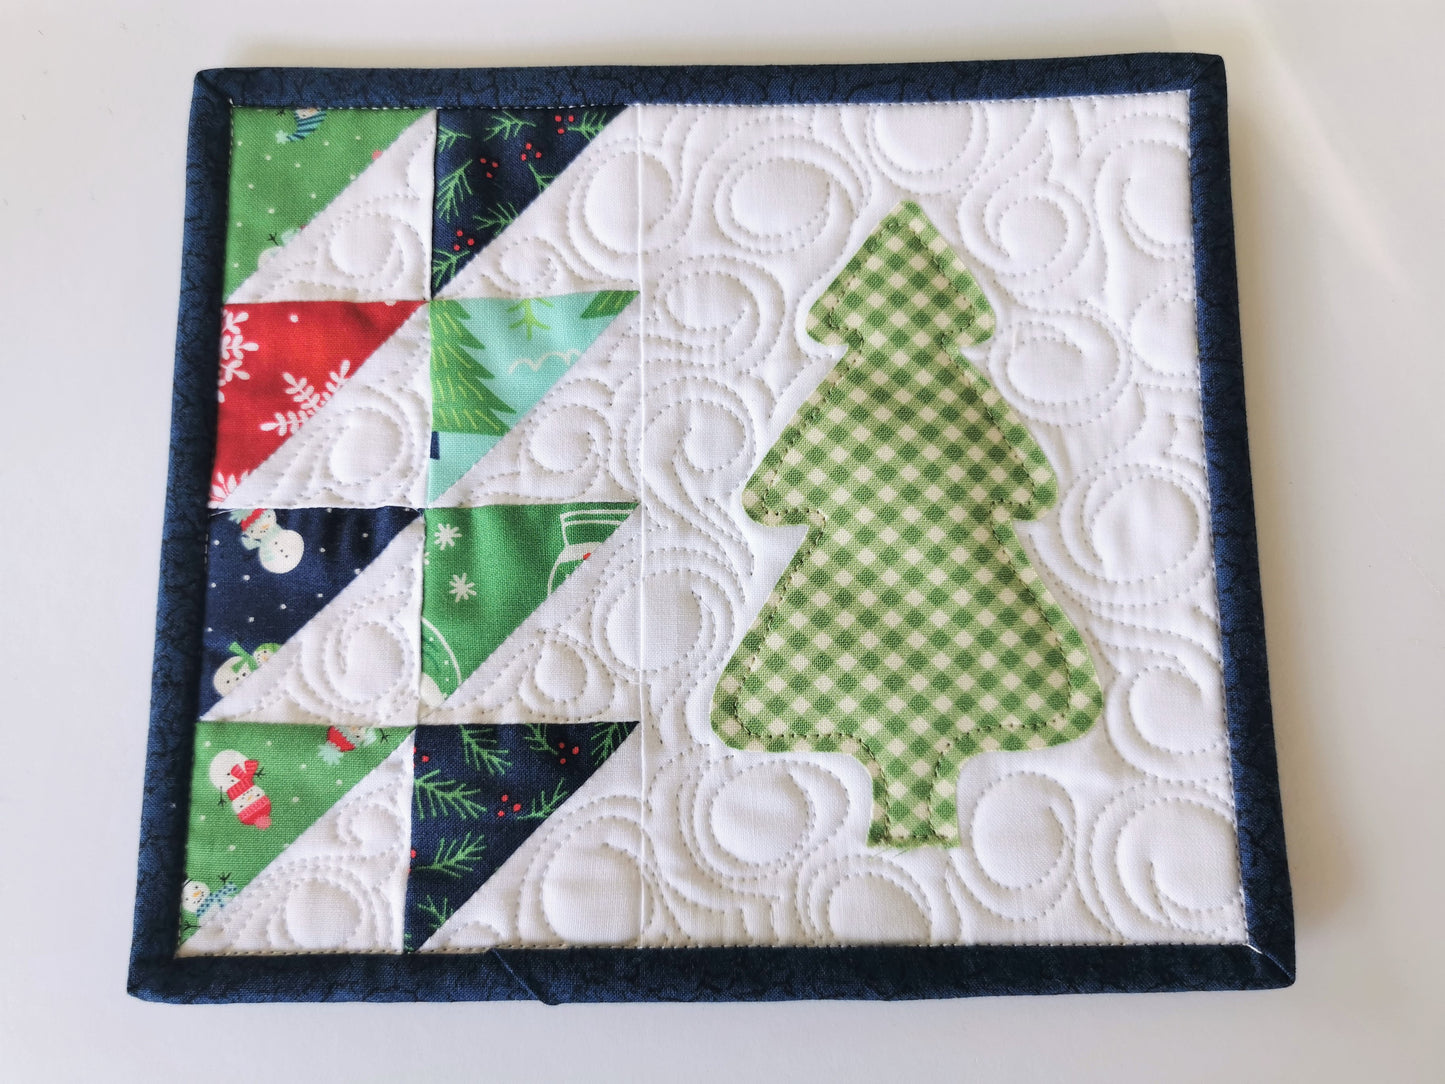 This mini christmas tree quilt features winter theme fabrics on white background. Small triangle patchwork down the left side  with a green gingham christmas tree on the right. Binding is a dark navy. 